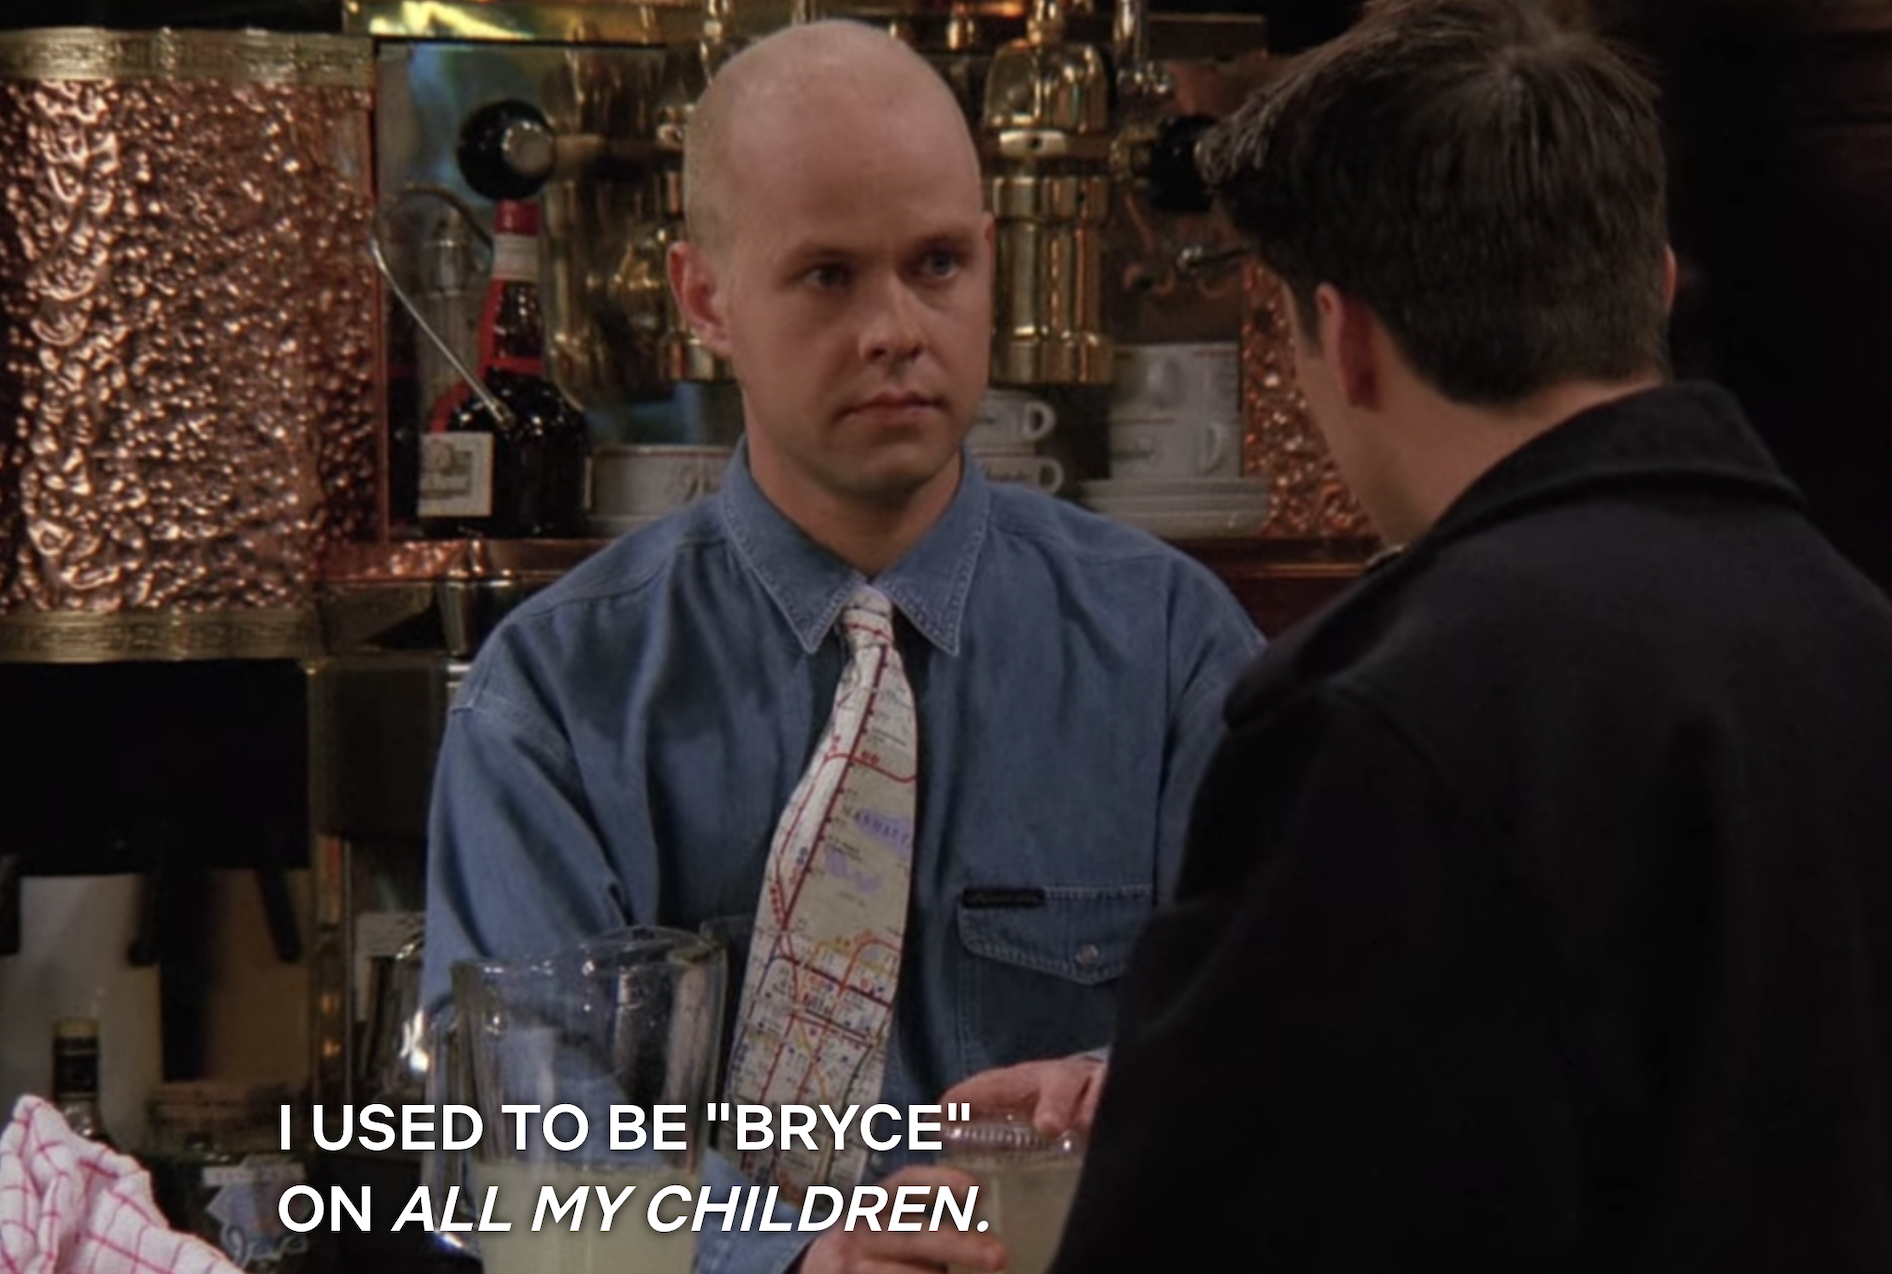 gunther friends quotes